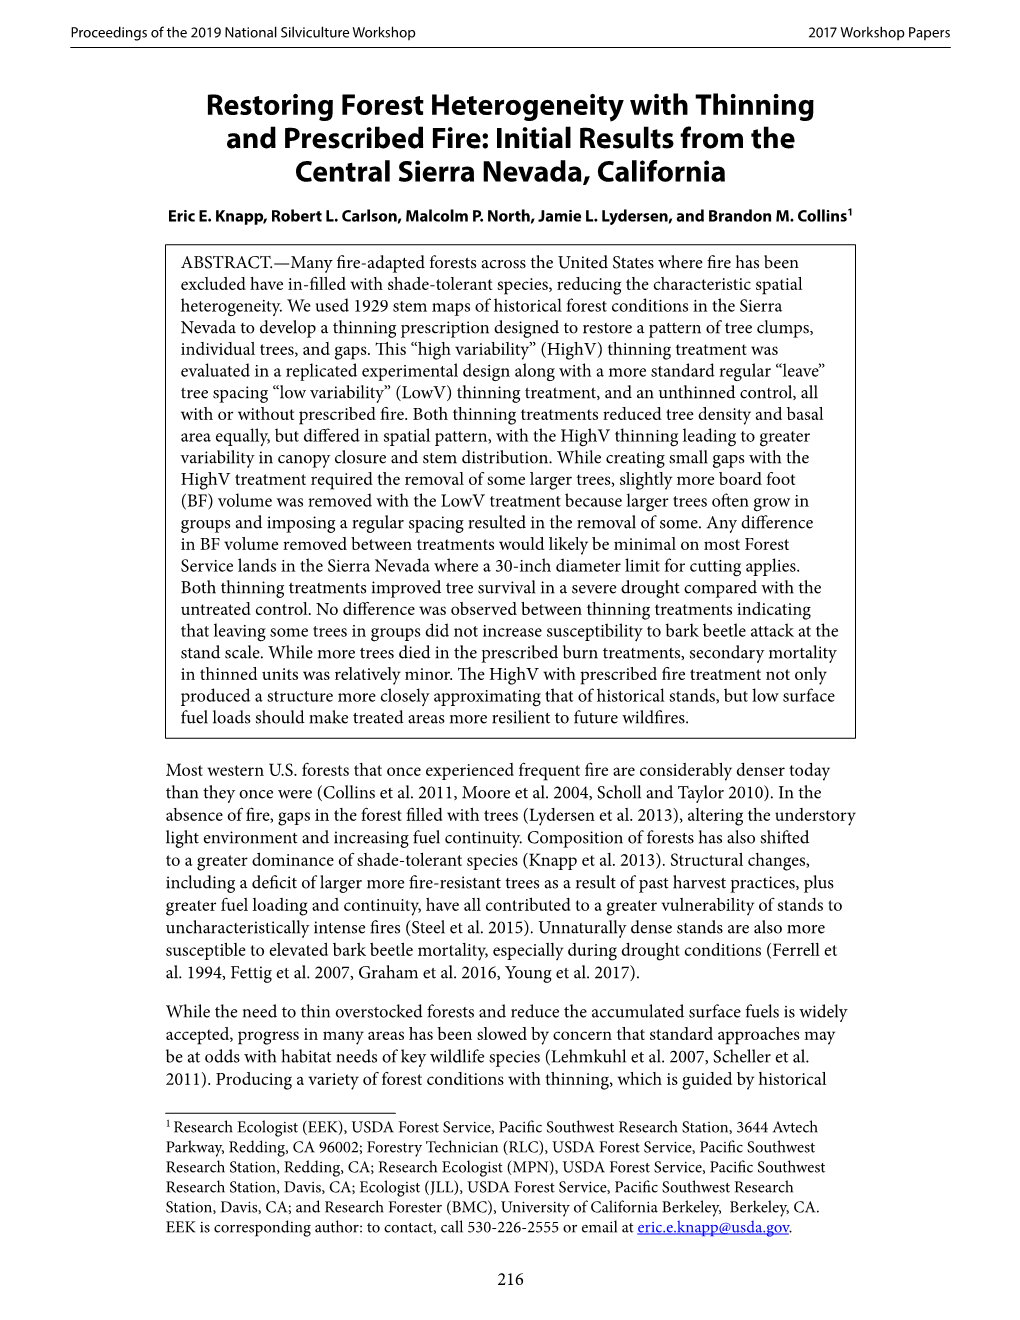 Restoring Forest Heterogeneity with Thinning and Prescribed Fire: Initial Results from the Central Sierra Nevada, California